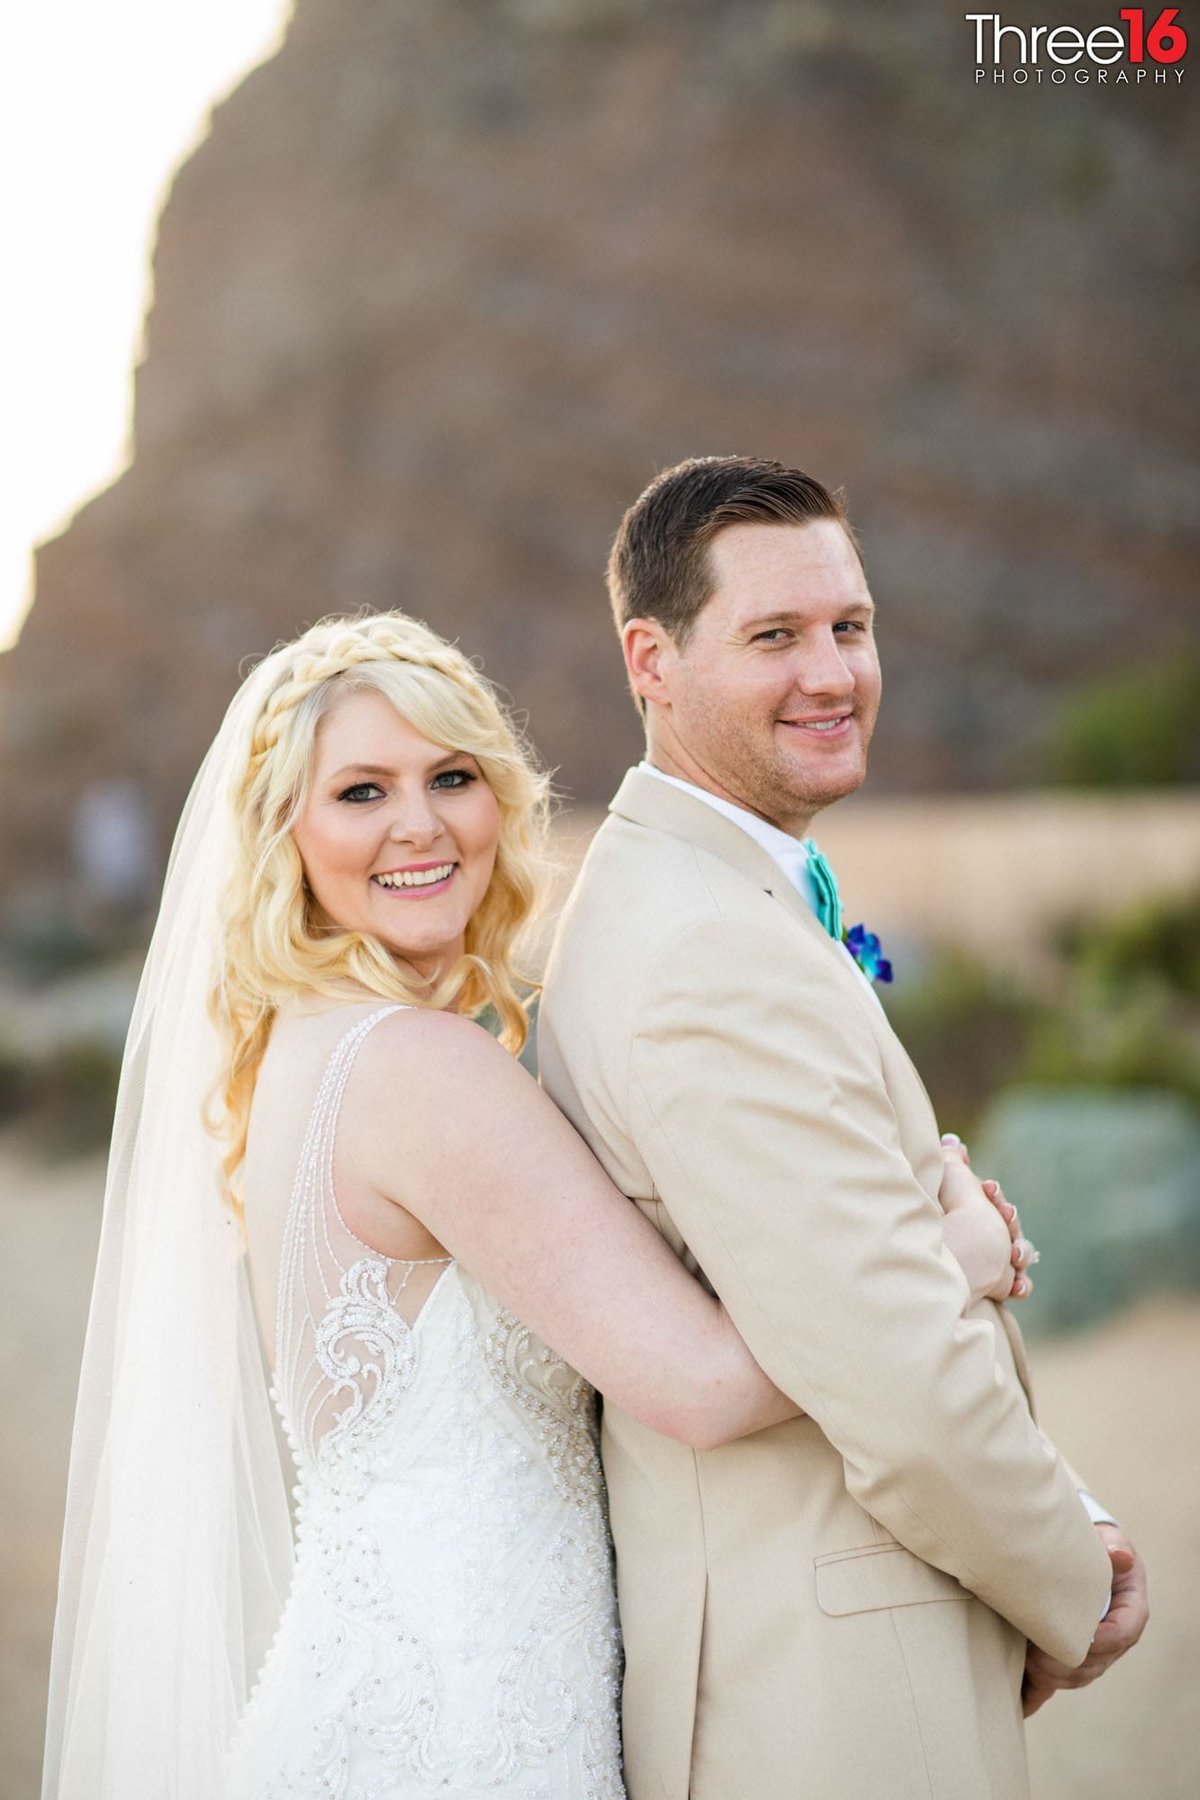 Bride embraces her Groom from behind as they smile for the wedding photographer